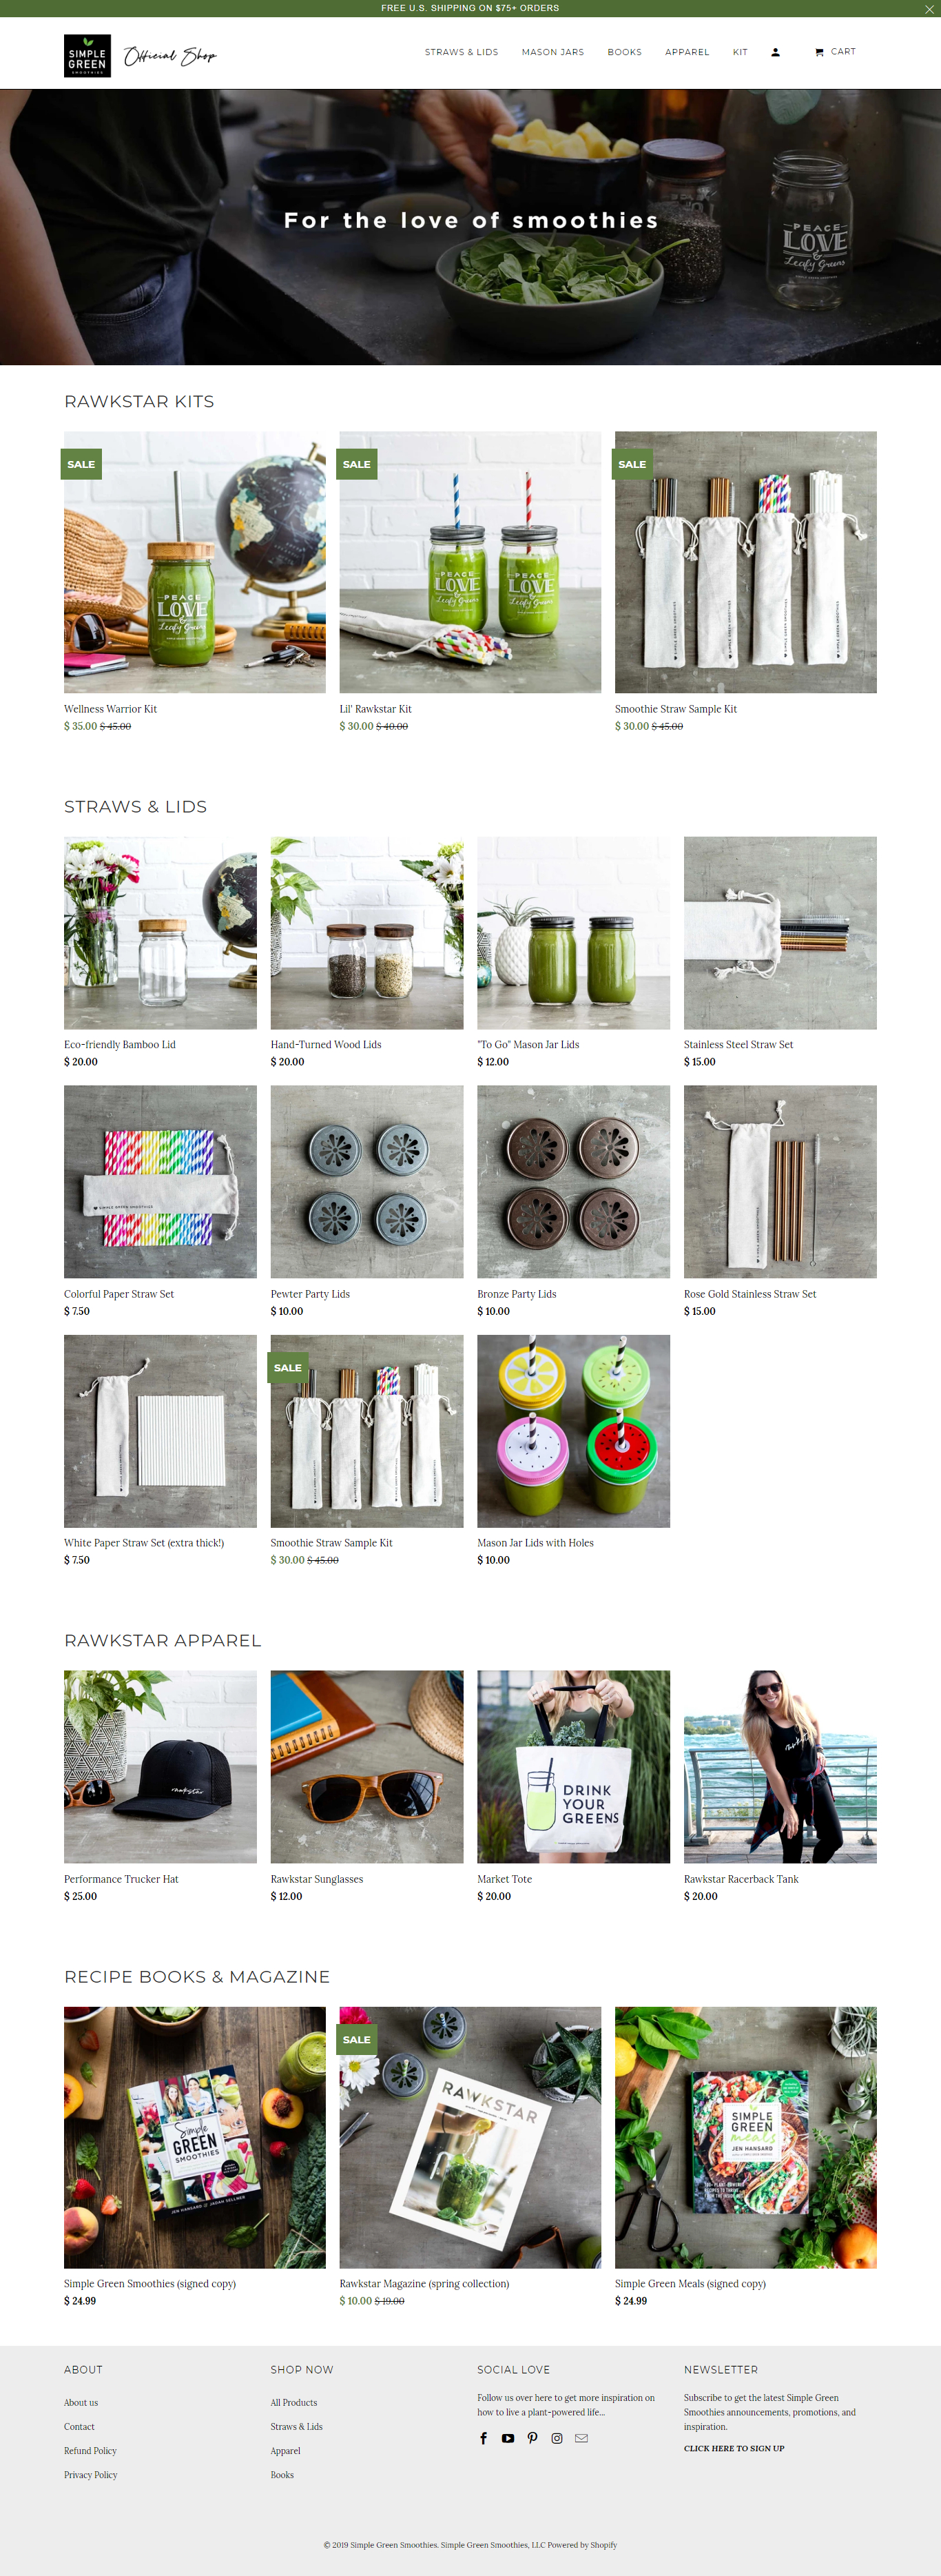 simplegreen - shopify store example